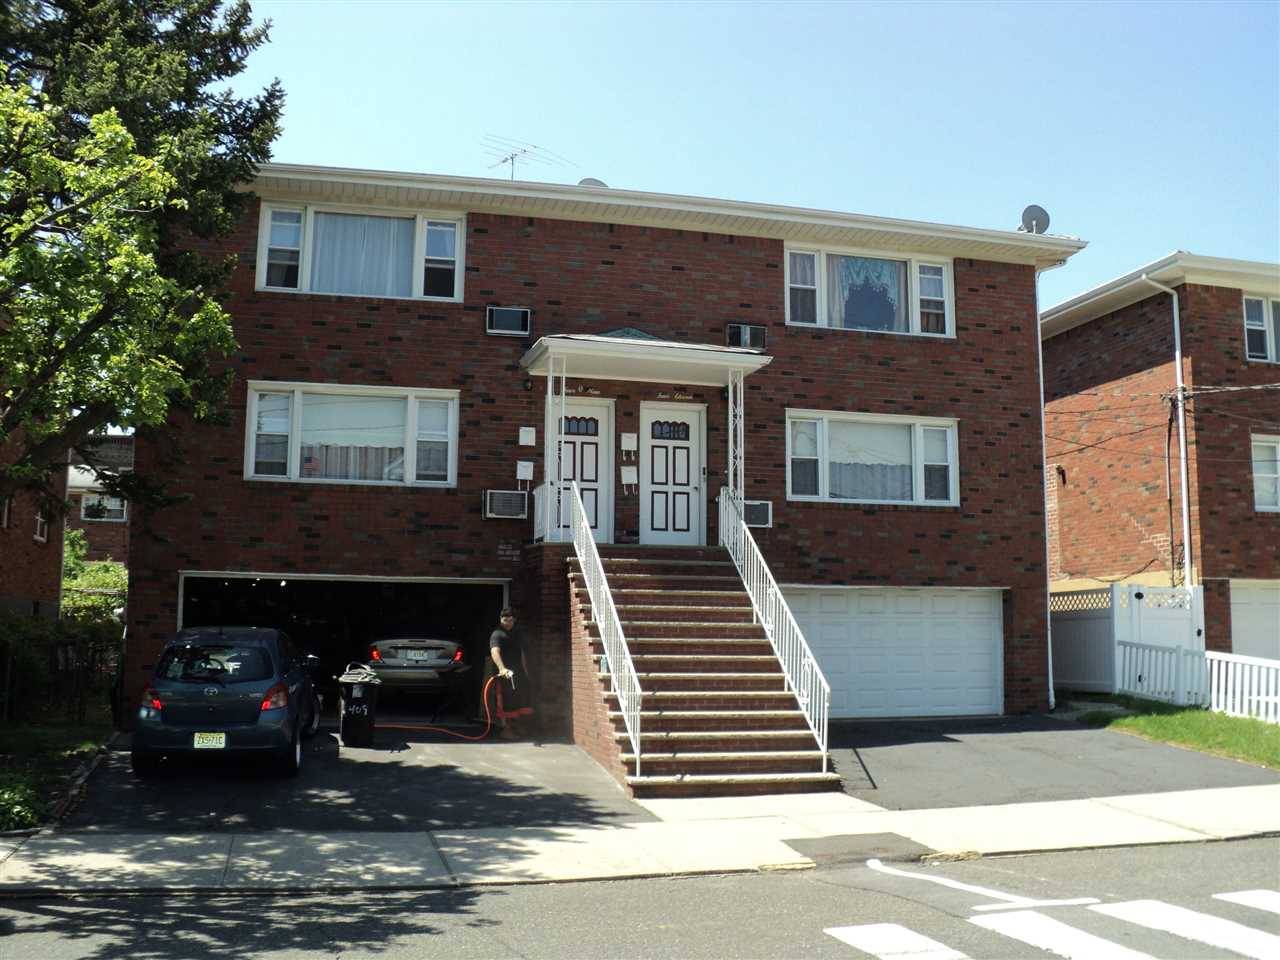 Fantastic young 2 family - Multi-Family New Jersey